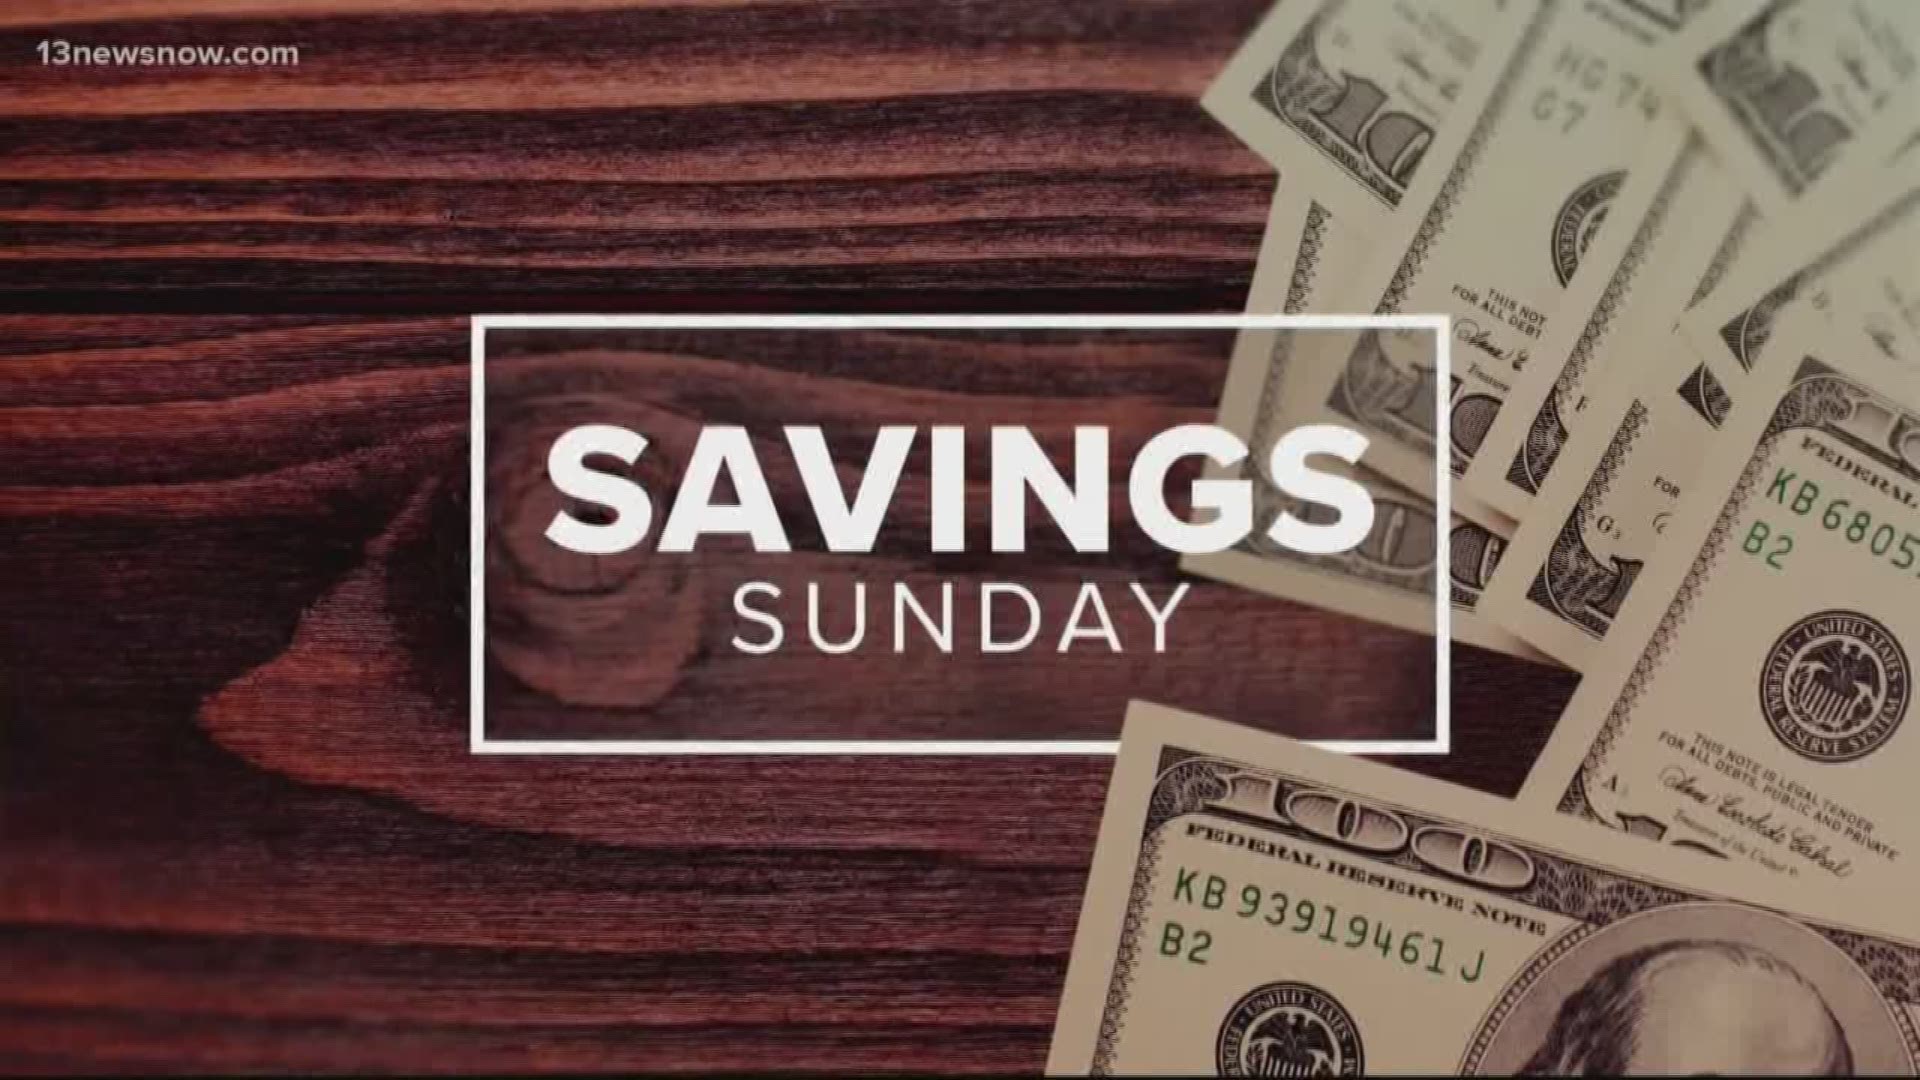 Laura Oliver from www.afrugalchick.com has your big savings for the week of September 29, 2019.